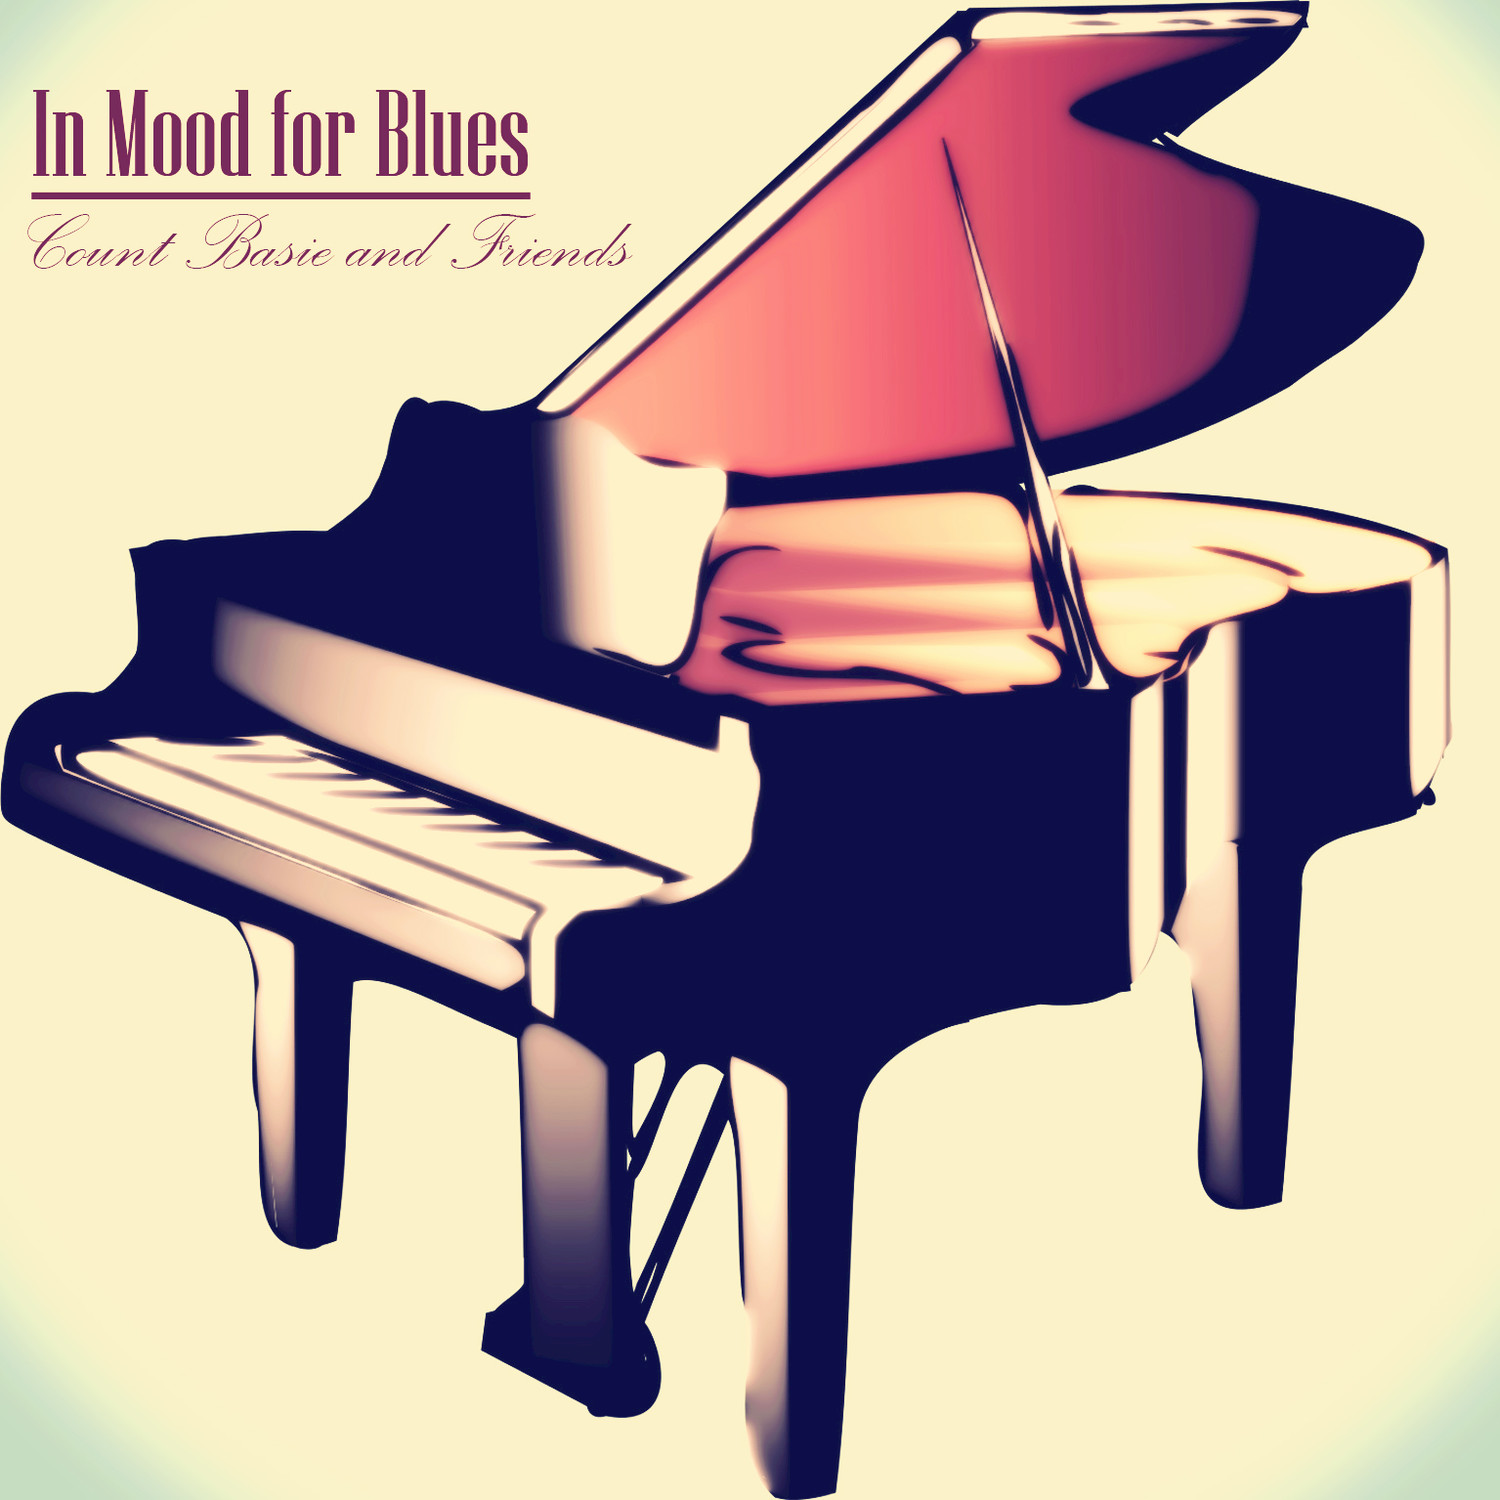 In Mood for Blues - Count Basie and Friends (Remastered)